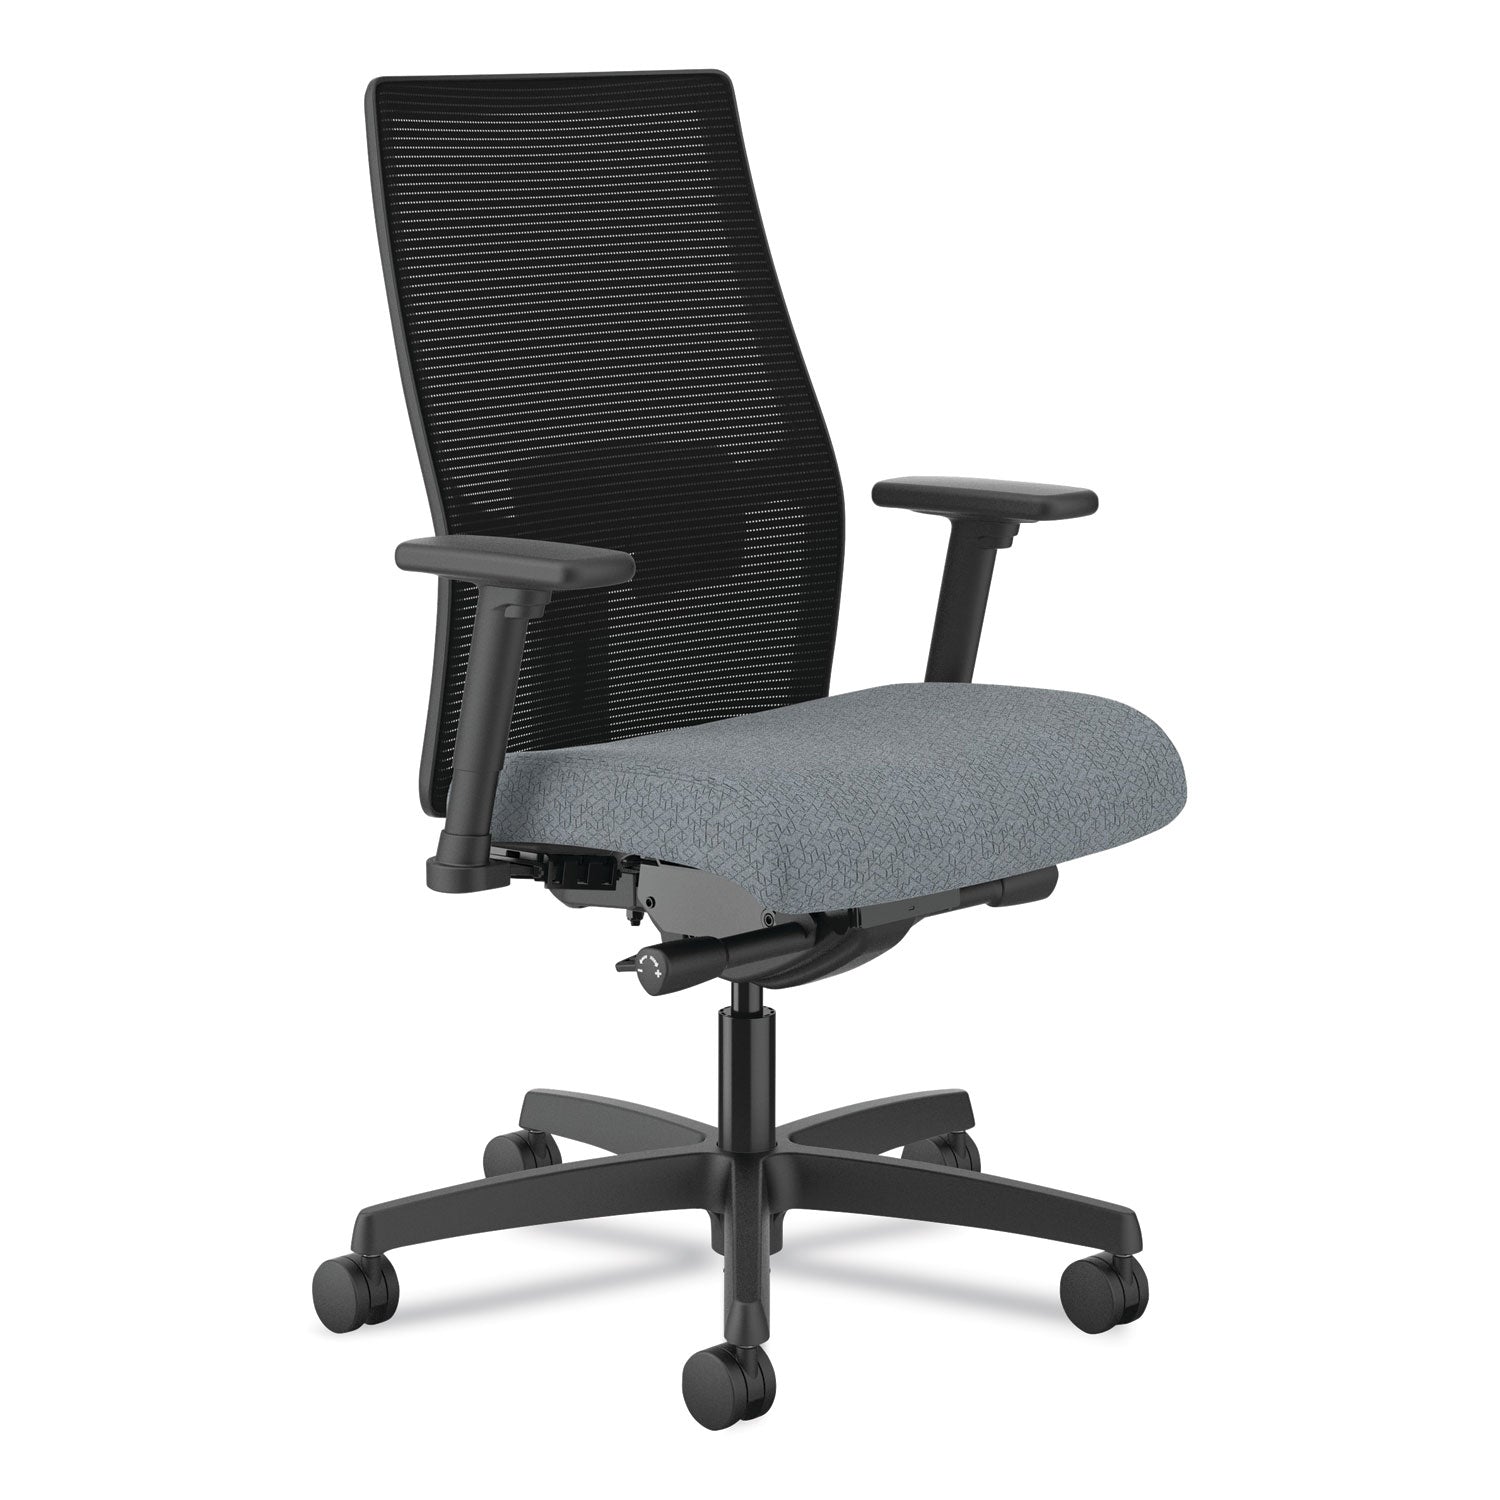 ignition-20-4-way-stretch-mid-back-mesh-task-chair-gray-adjustable-lumbar-support-basalt-black-ships-in-7-10-bus-days_honi2m2bmla25tk - 3